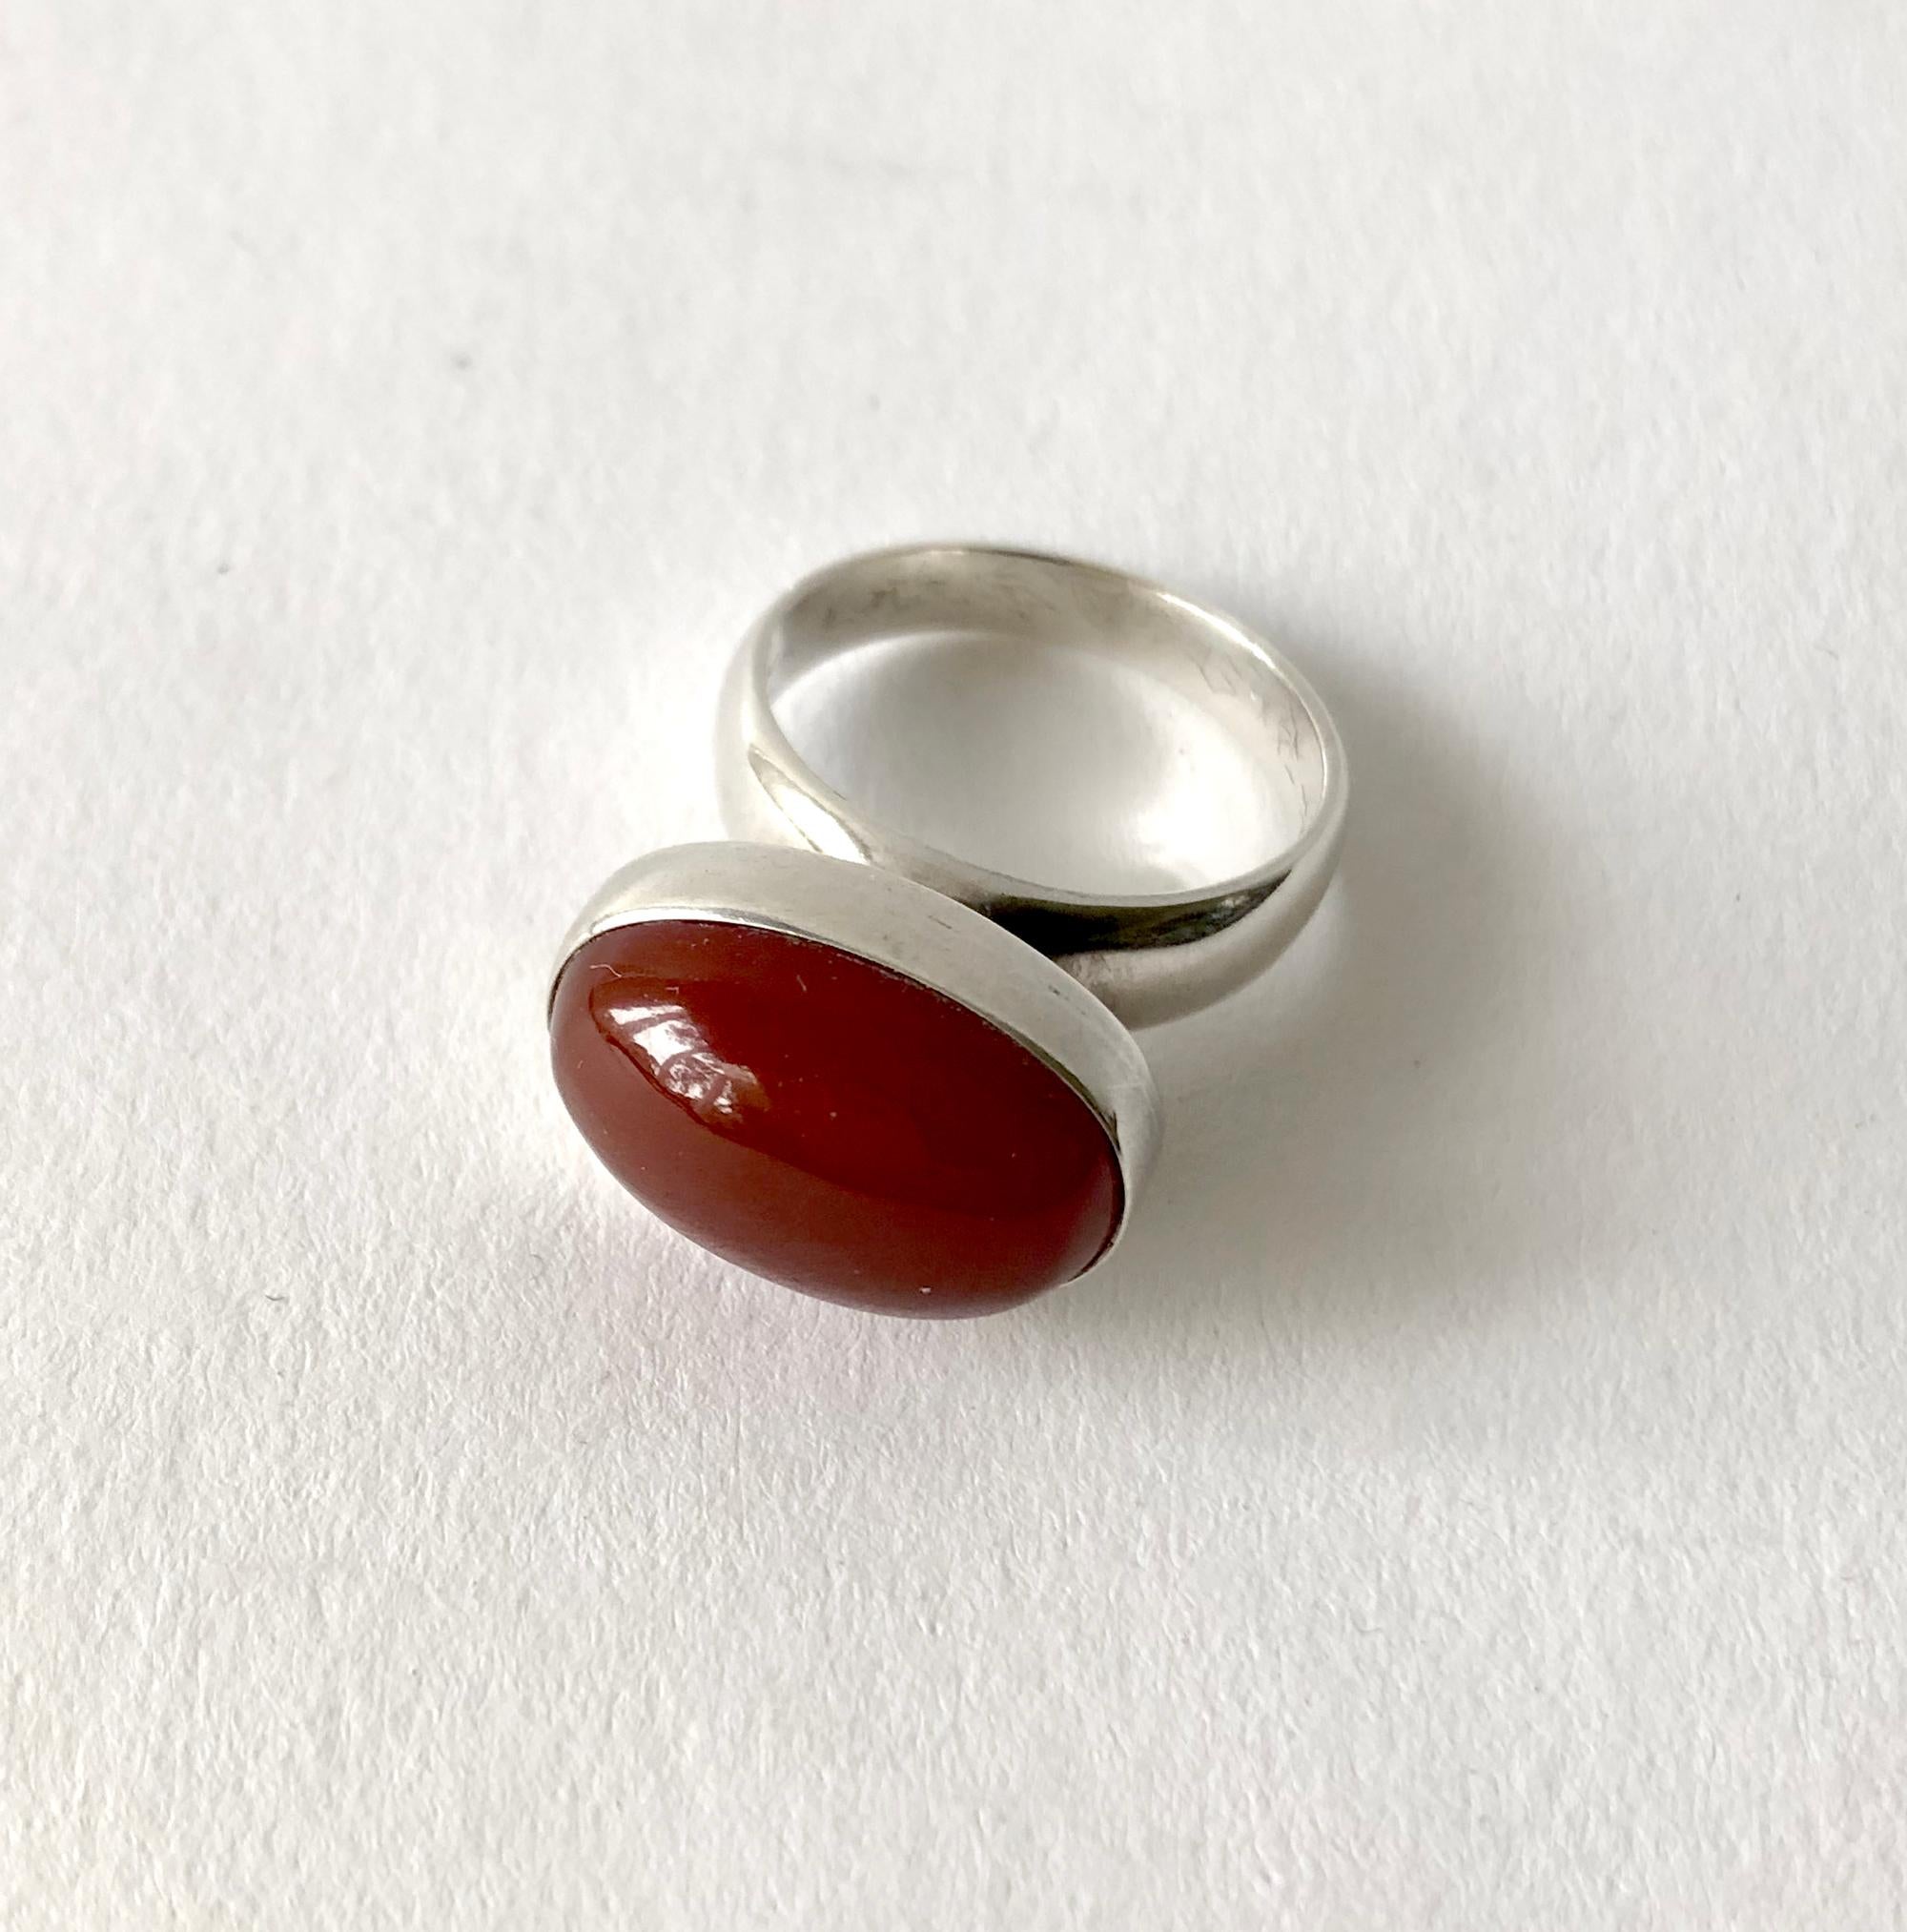 Rare sterling silver ring with carnelian cabochon created by Nanna Ditzel for Georg Jensen.  Ring is a finger size 6.5 to 6.75 and is signed Georg Jensen, Denmark, 123 B.  In very good vintage condition.  